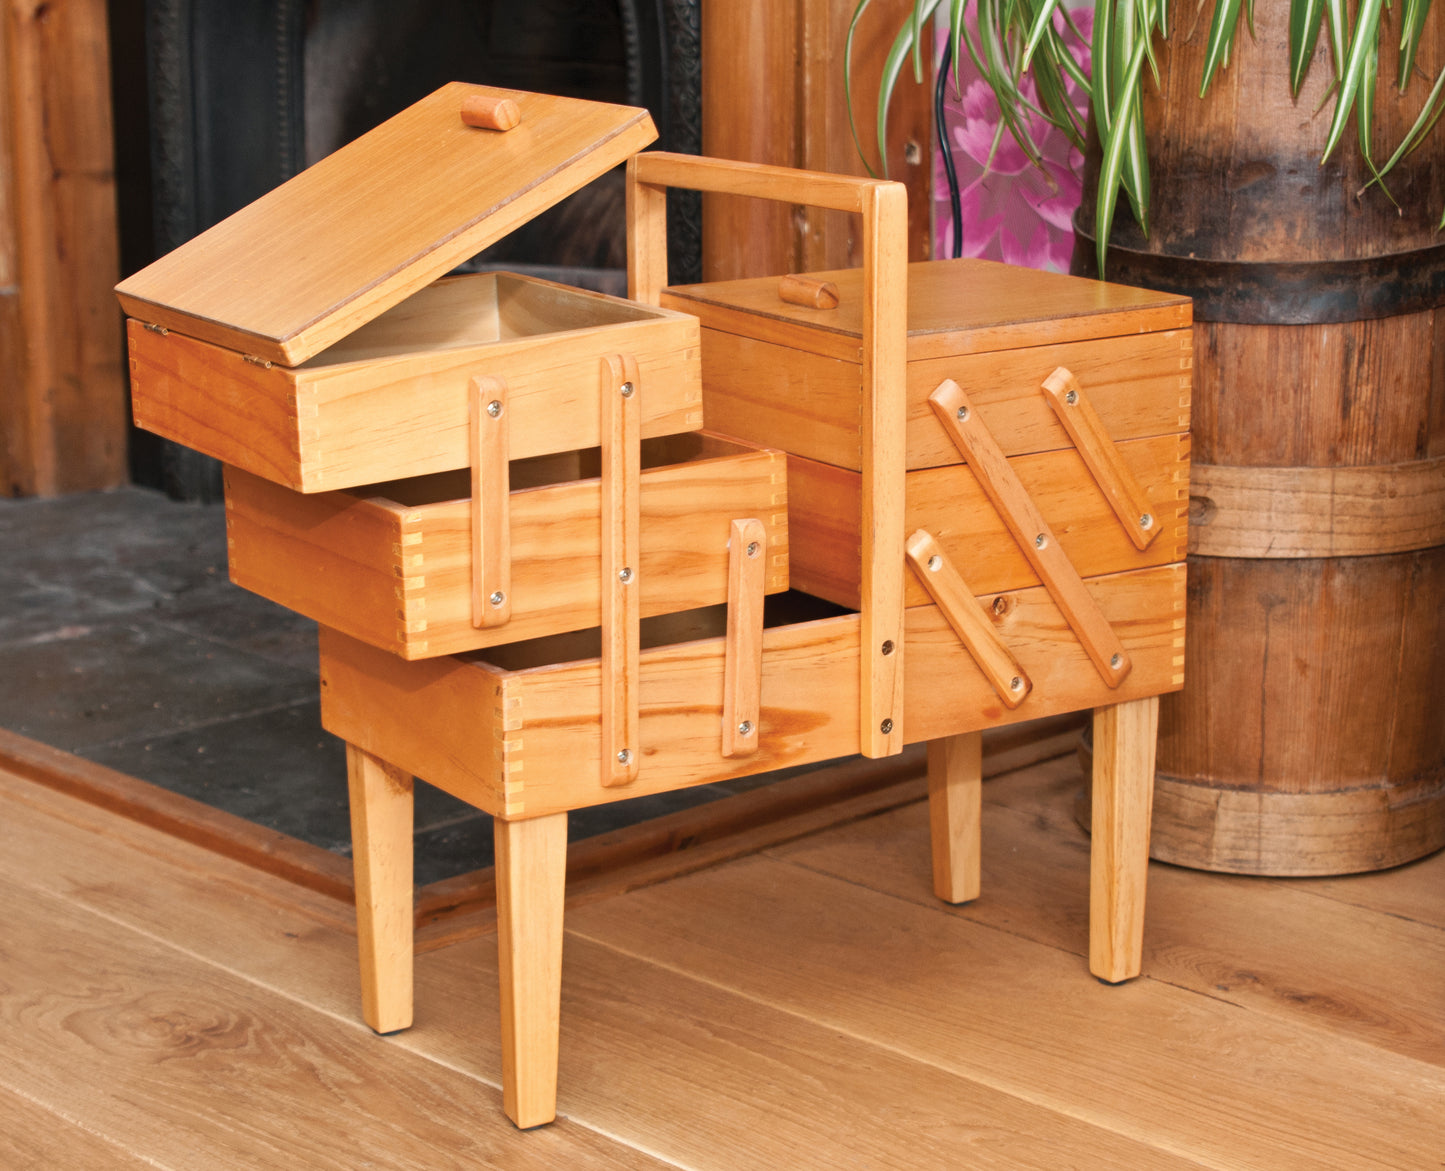 Hobby Gift 3 Tier Cantilever Beech Wood Sewing Box with Legs